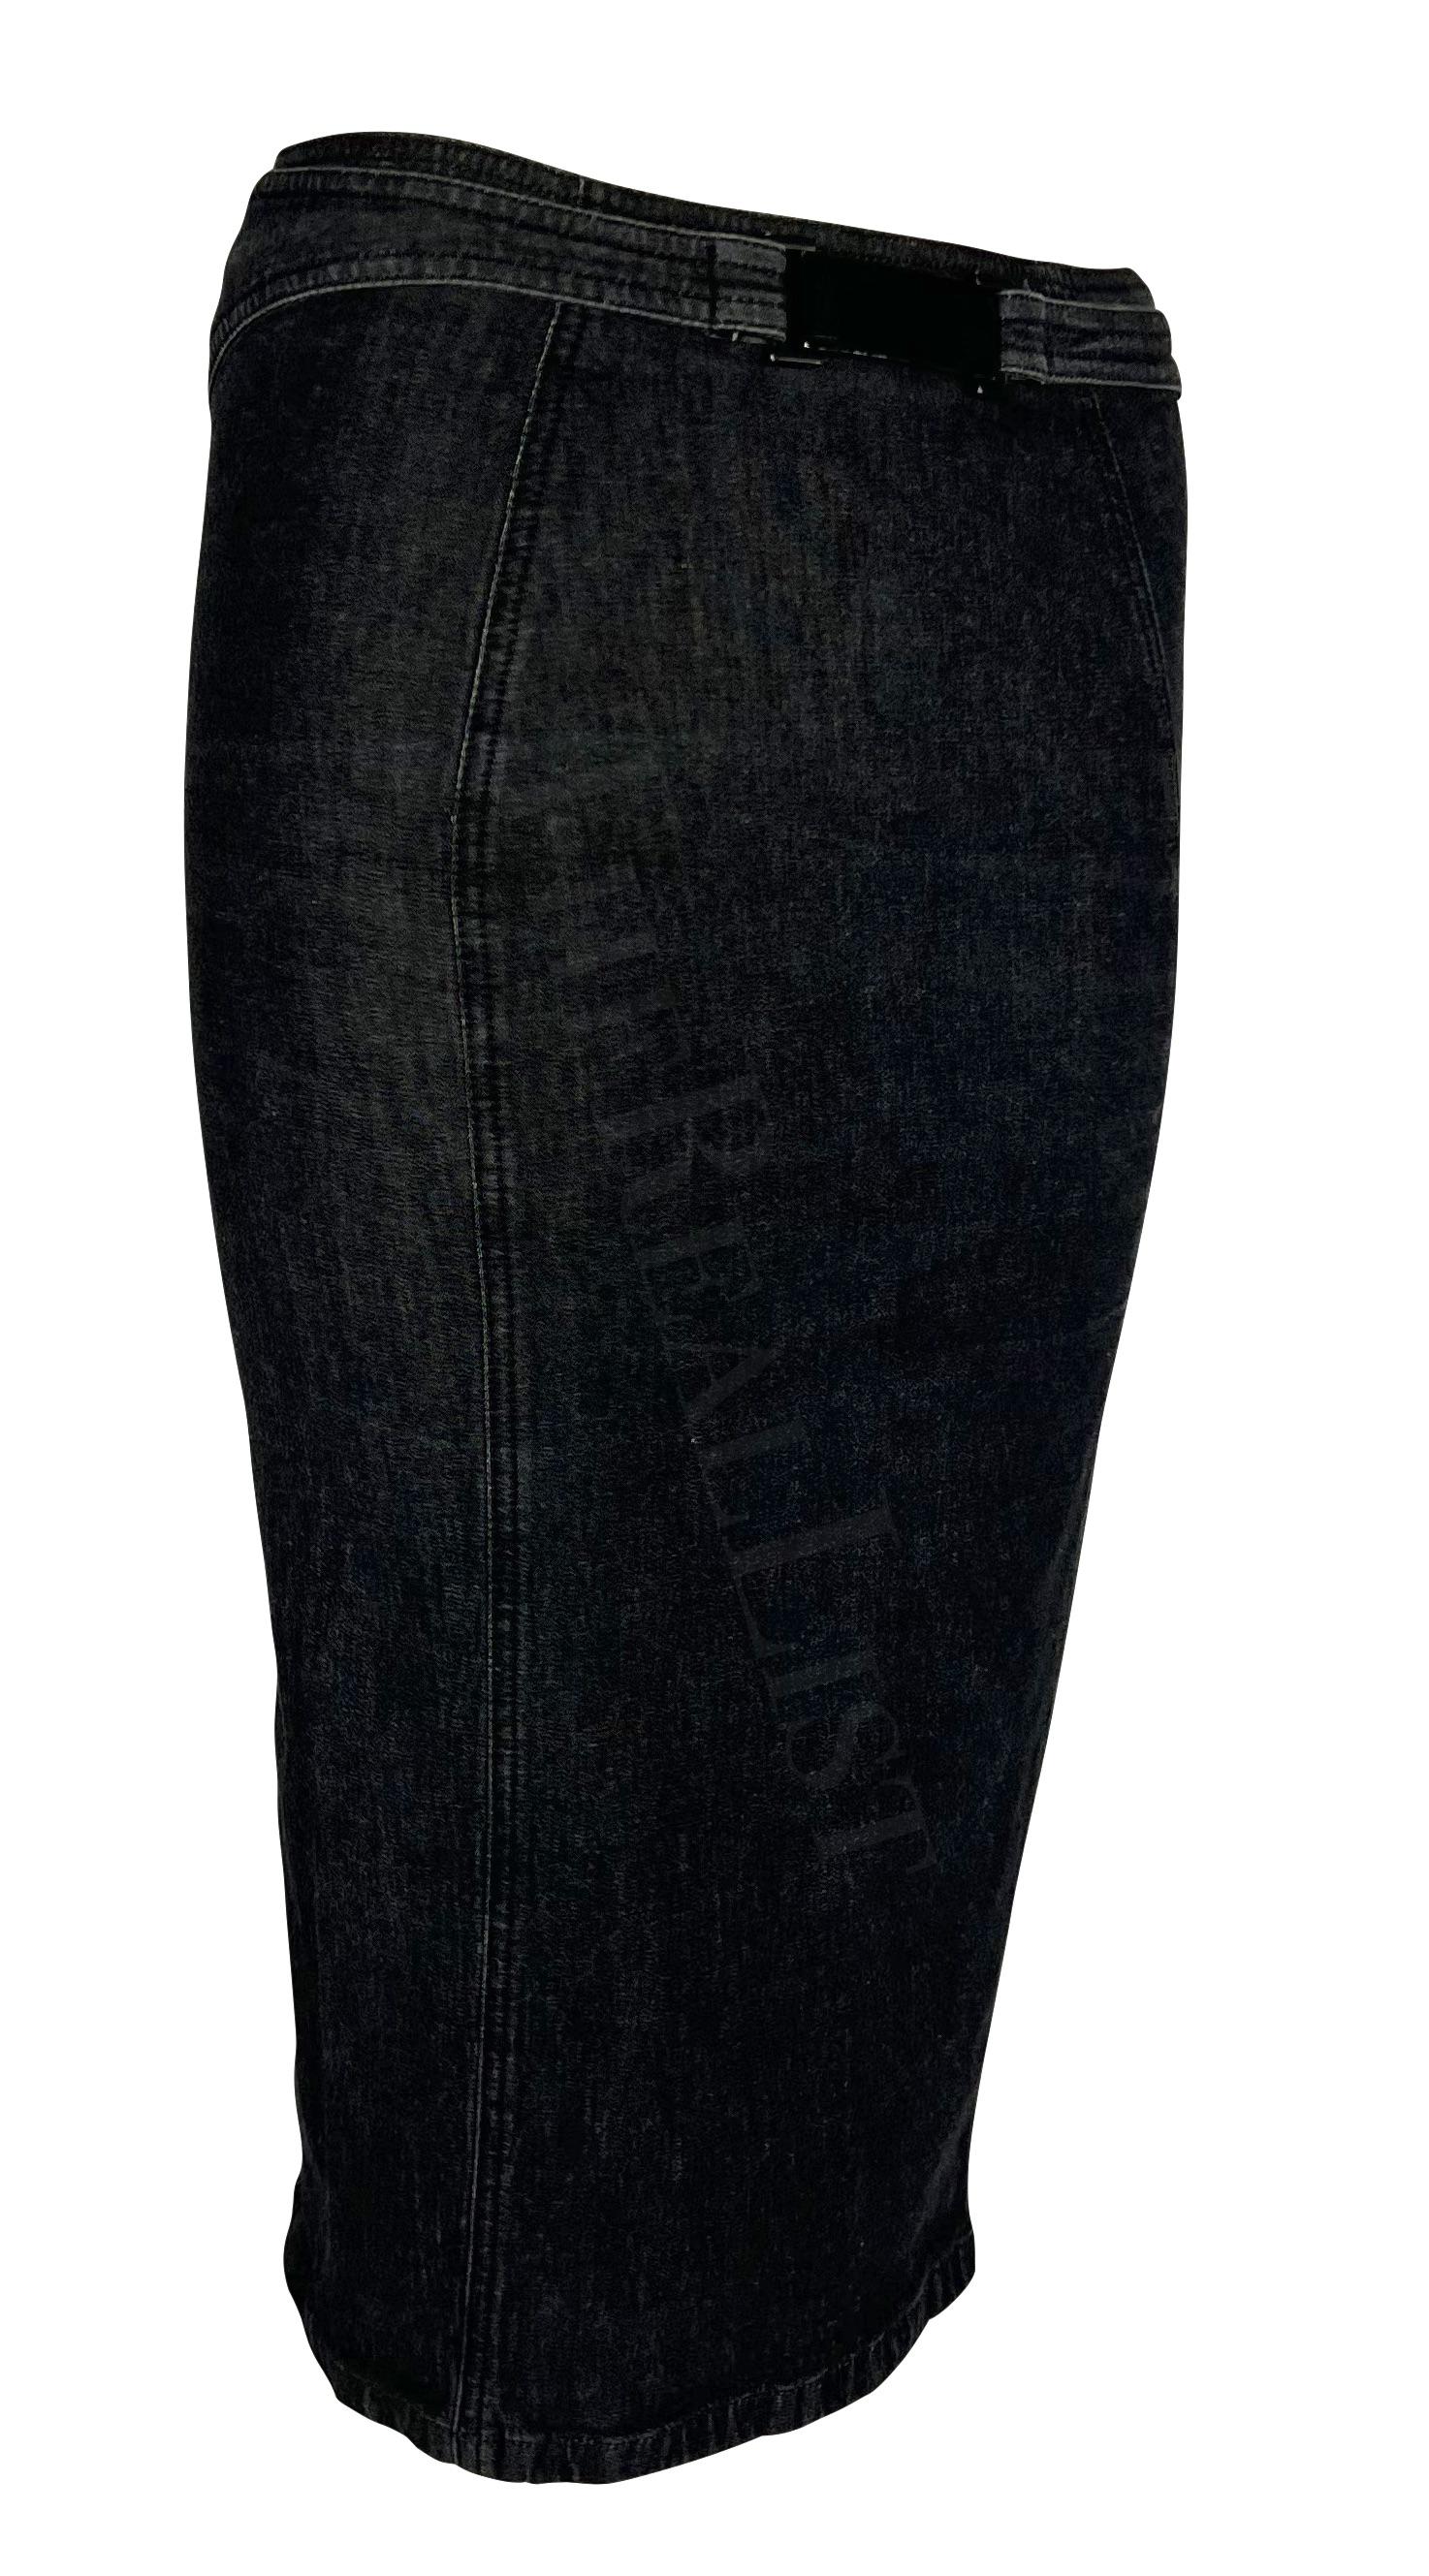 2001 Gucci by Tom Ford Dark Wash Denim Skirt with Metal Buckle For Sale 3